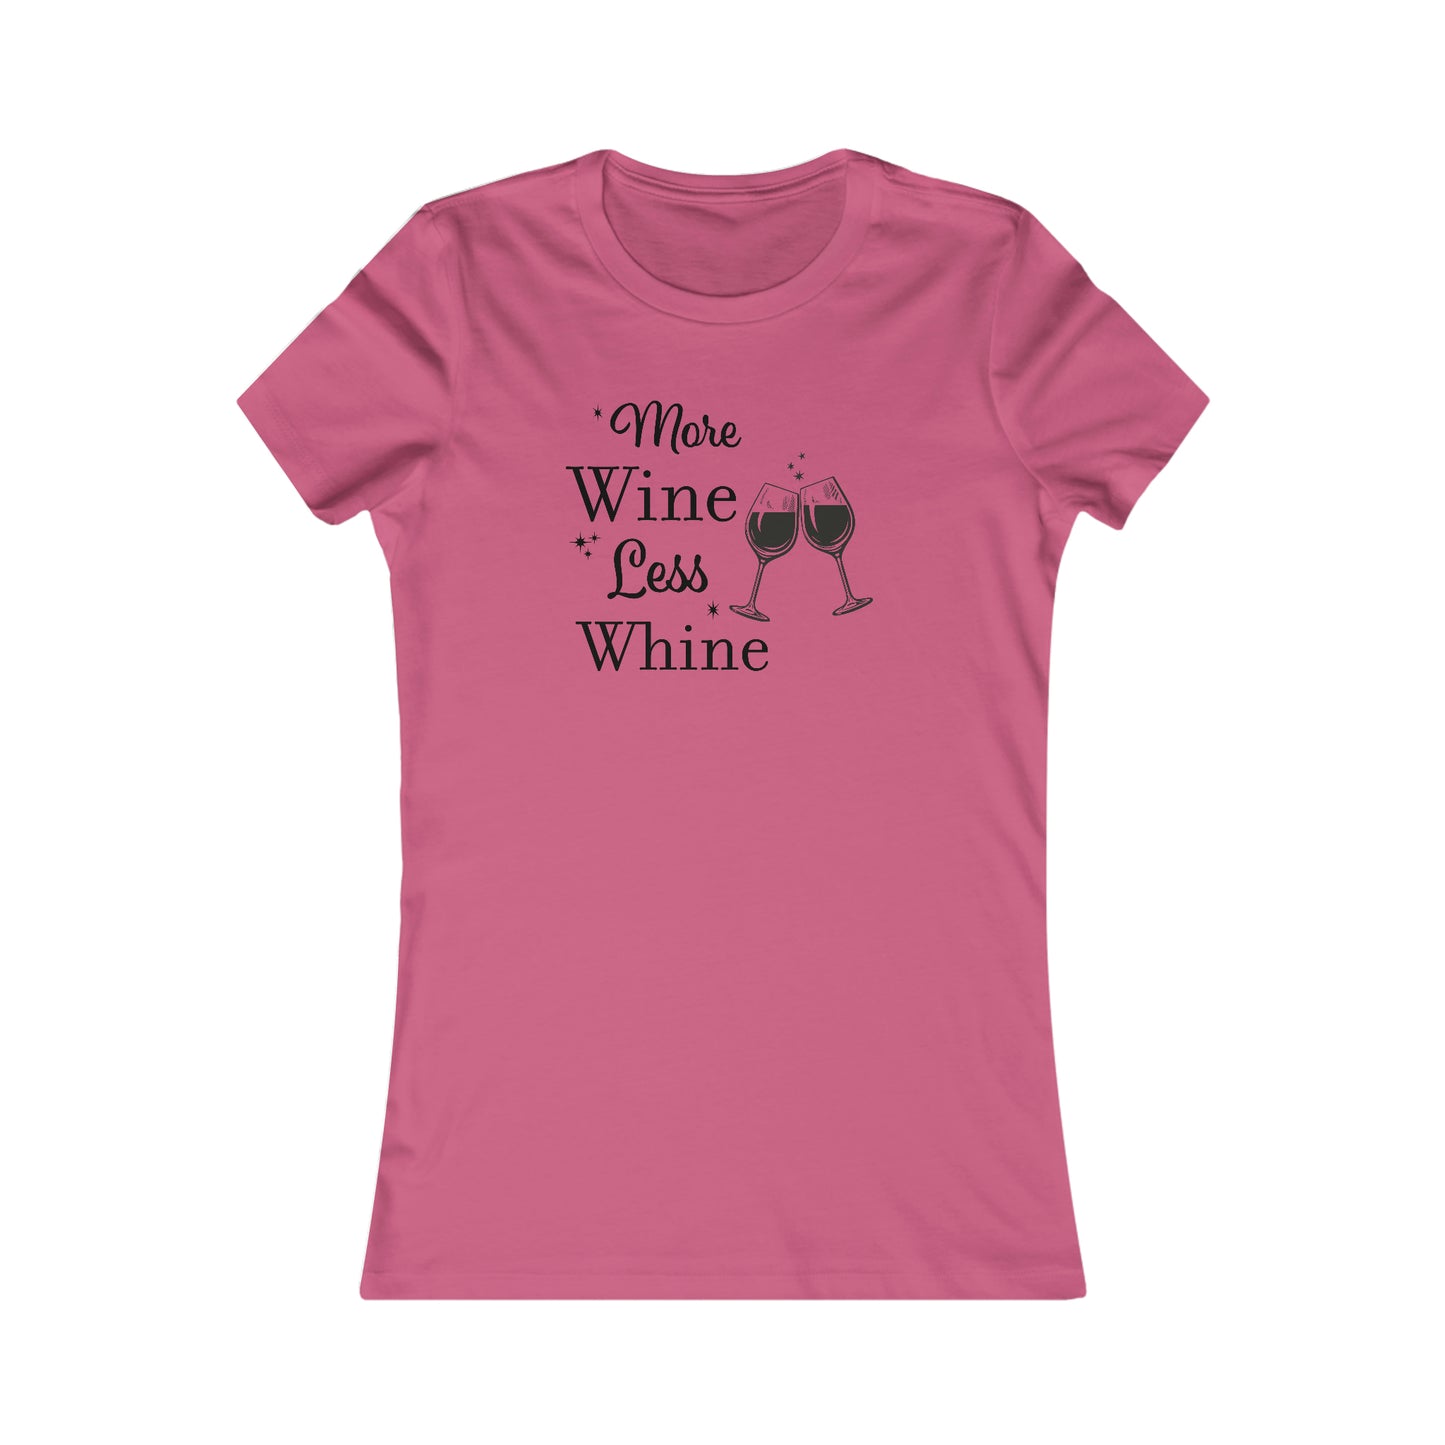 Wine Lovers T-Shirt For Birthday Gift Wine T Shirt For Wine Day TShirt For Wine Drinking T-Shirt For Funny Wine Girls Trip Shirt